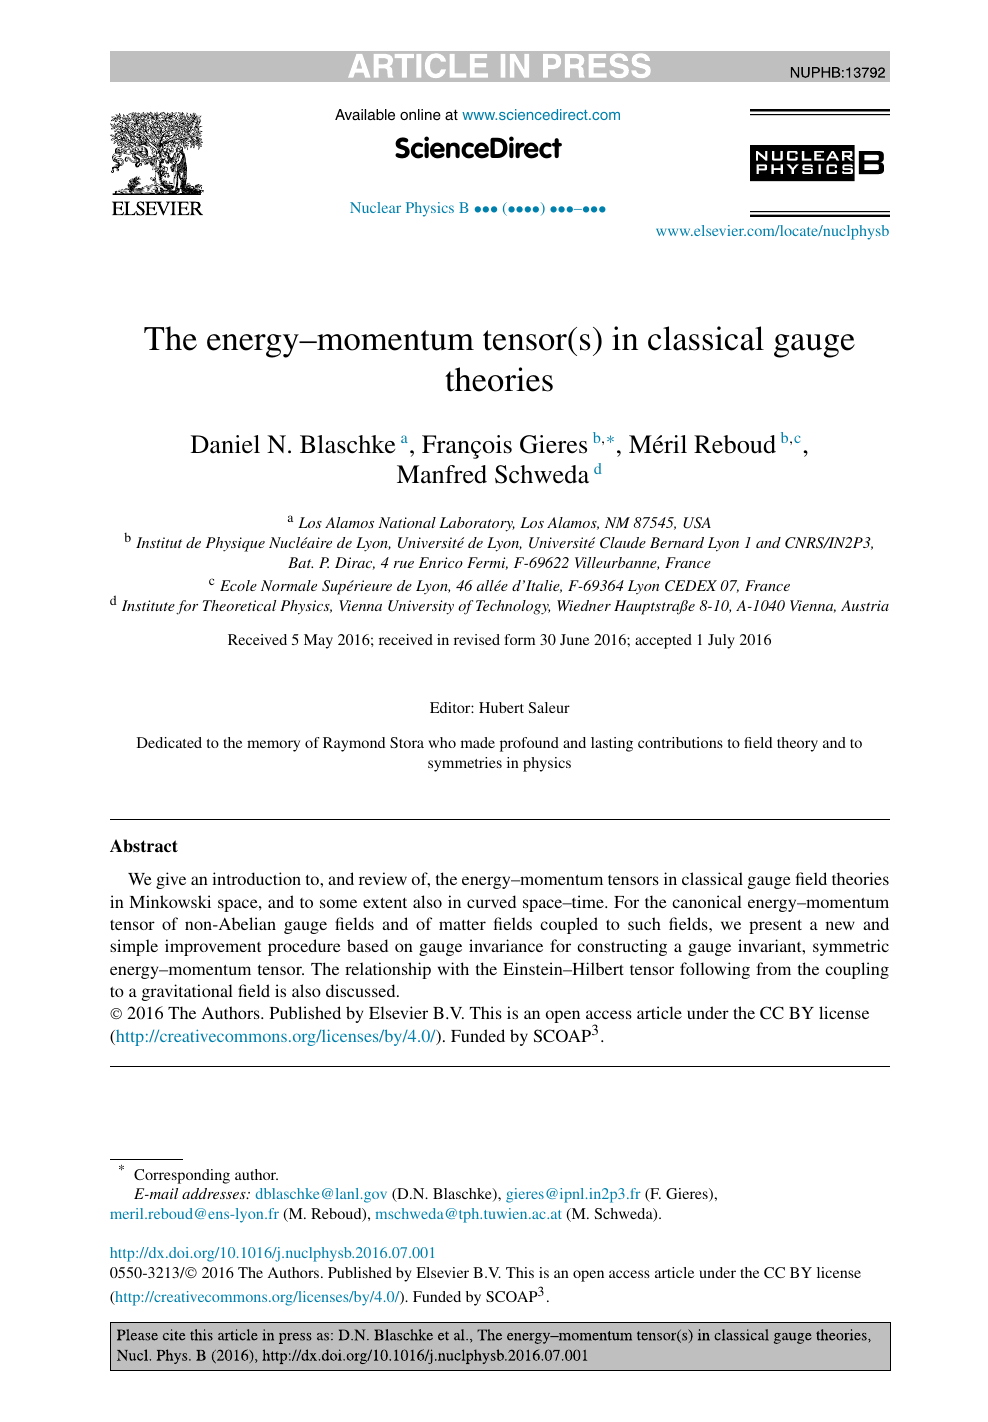 The Energymomentum Tensors In Classical Gauge Theories - 